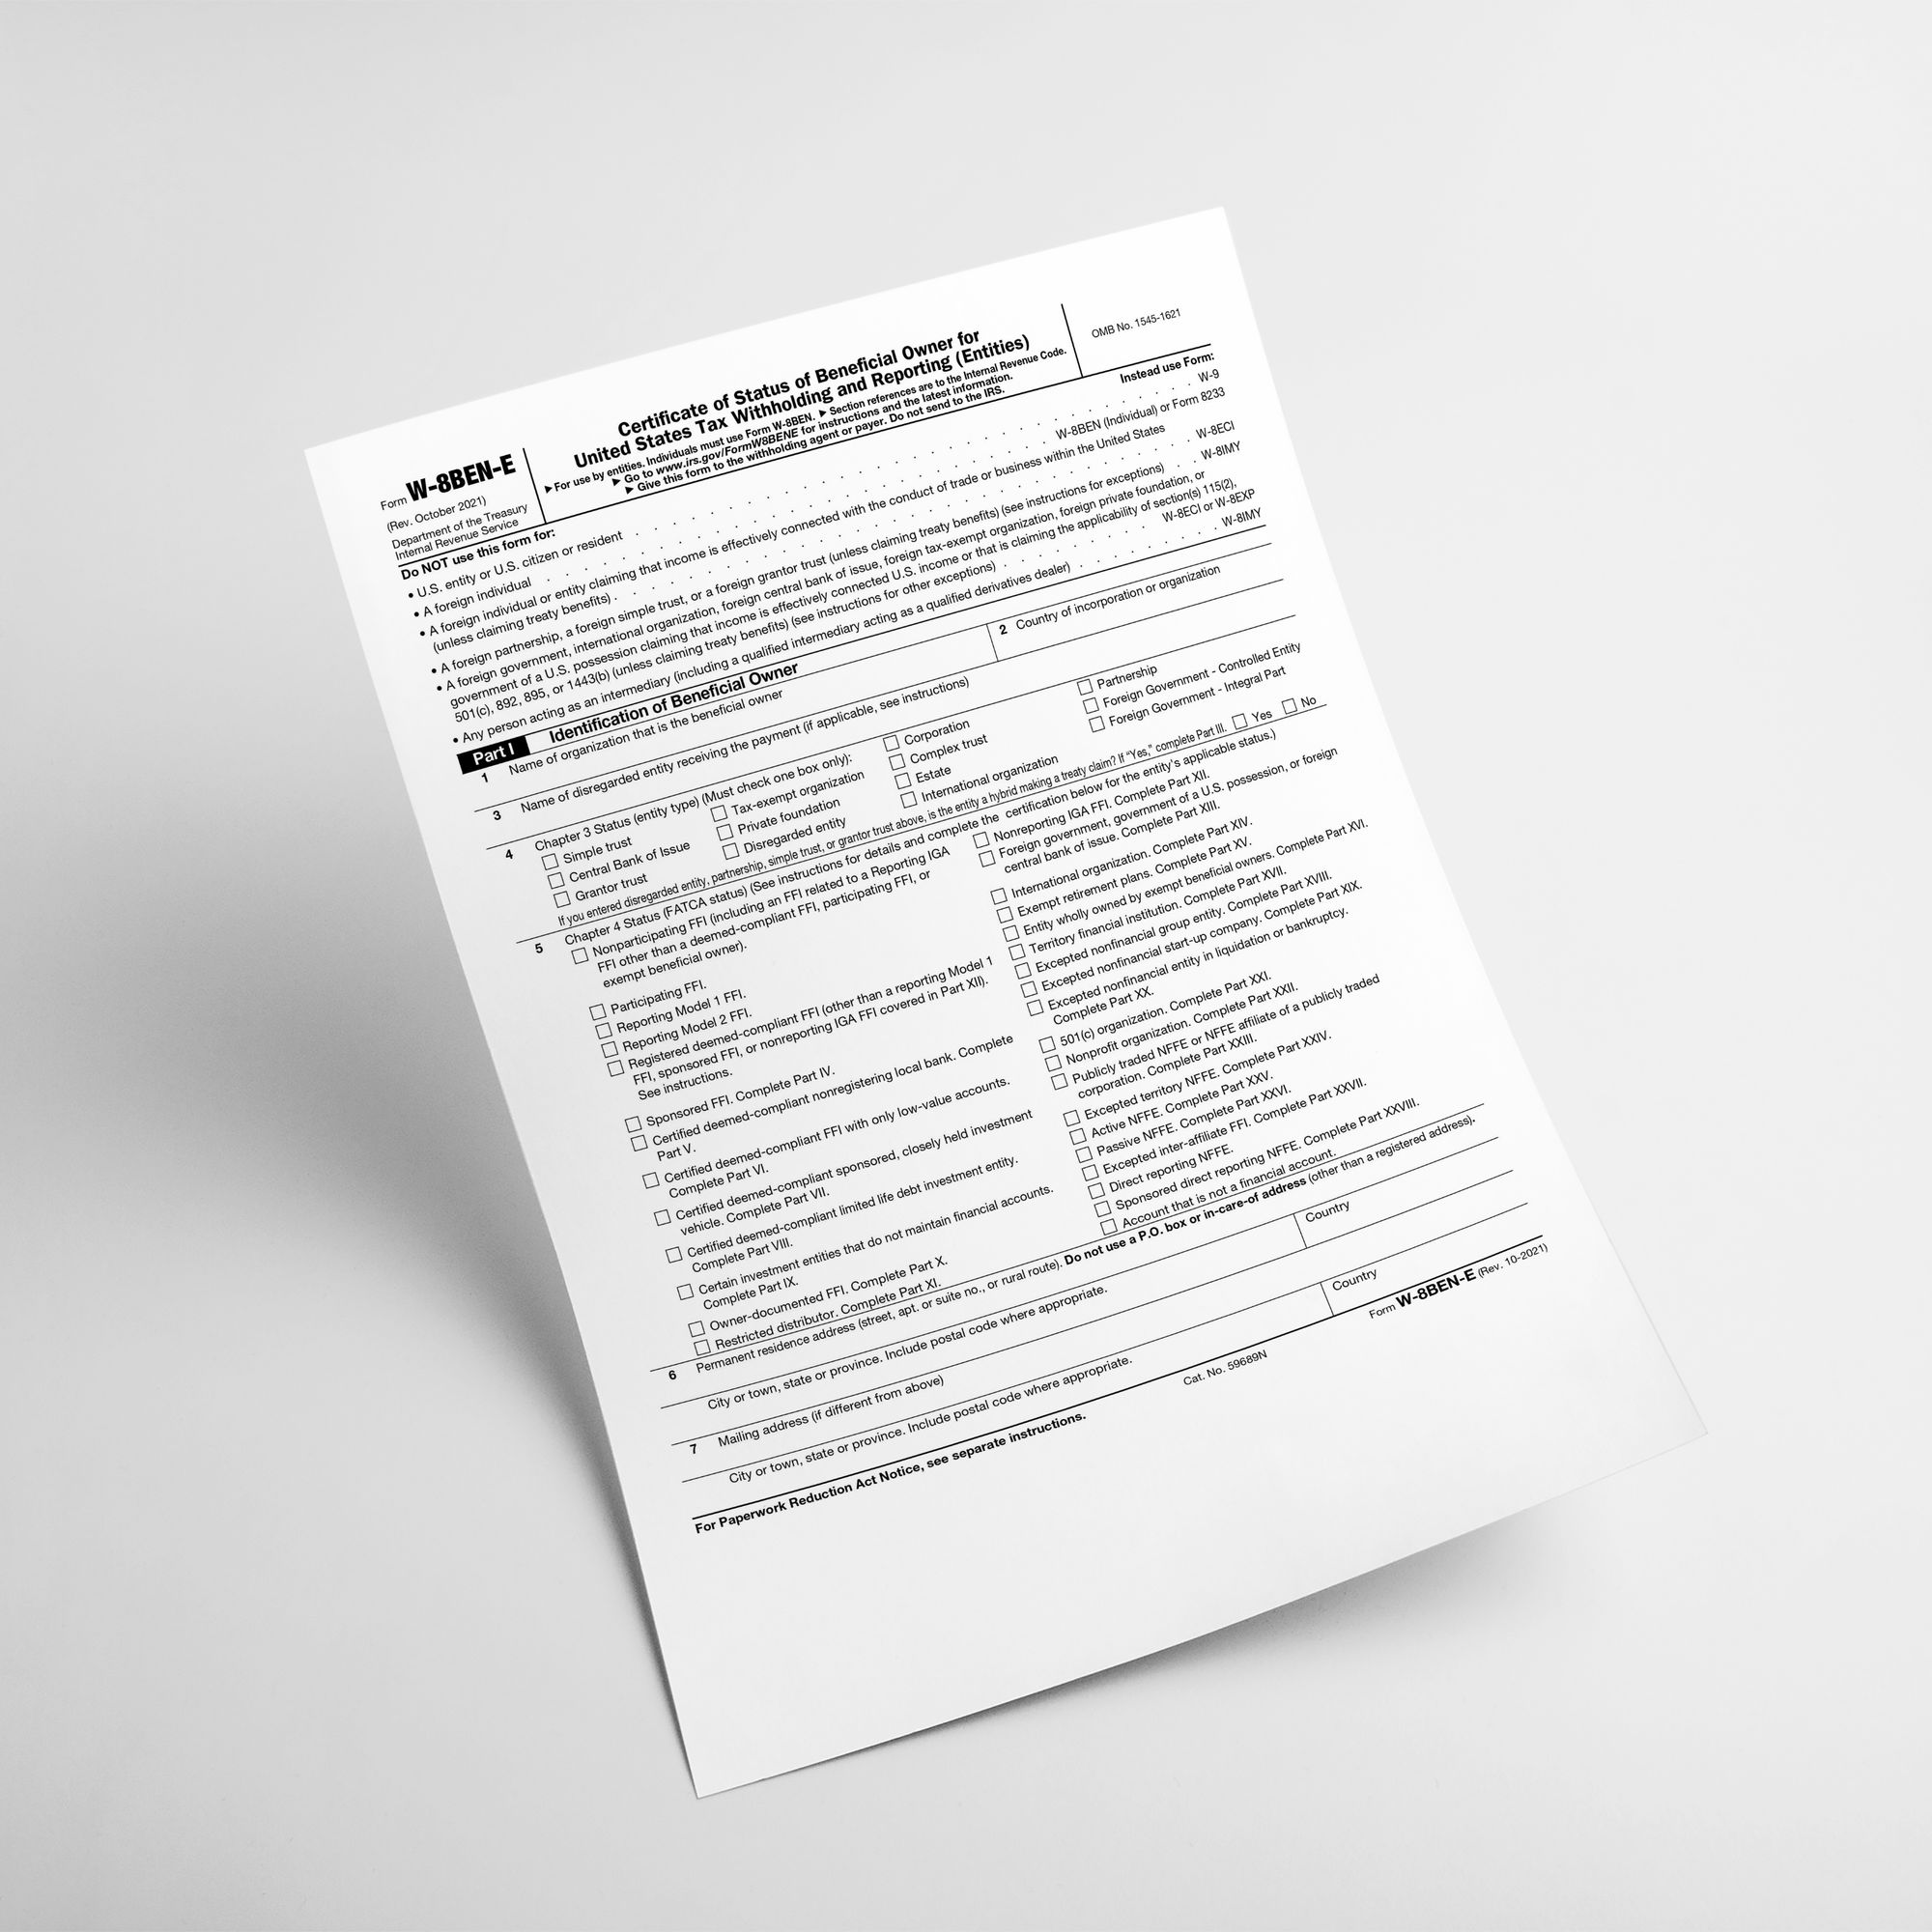 W-8BEN: When to Use It and Other Types of W-8 Tax Forms